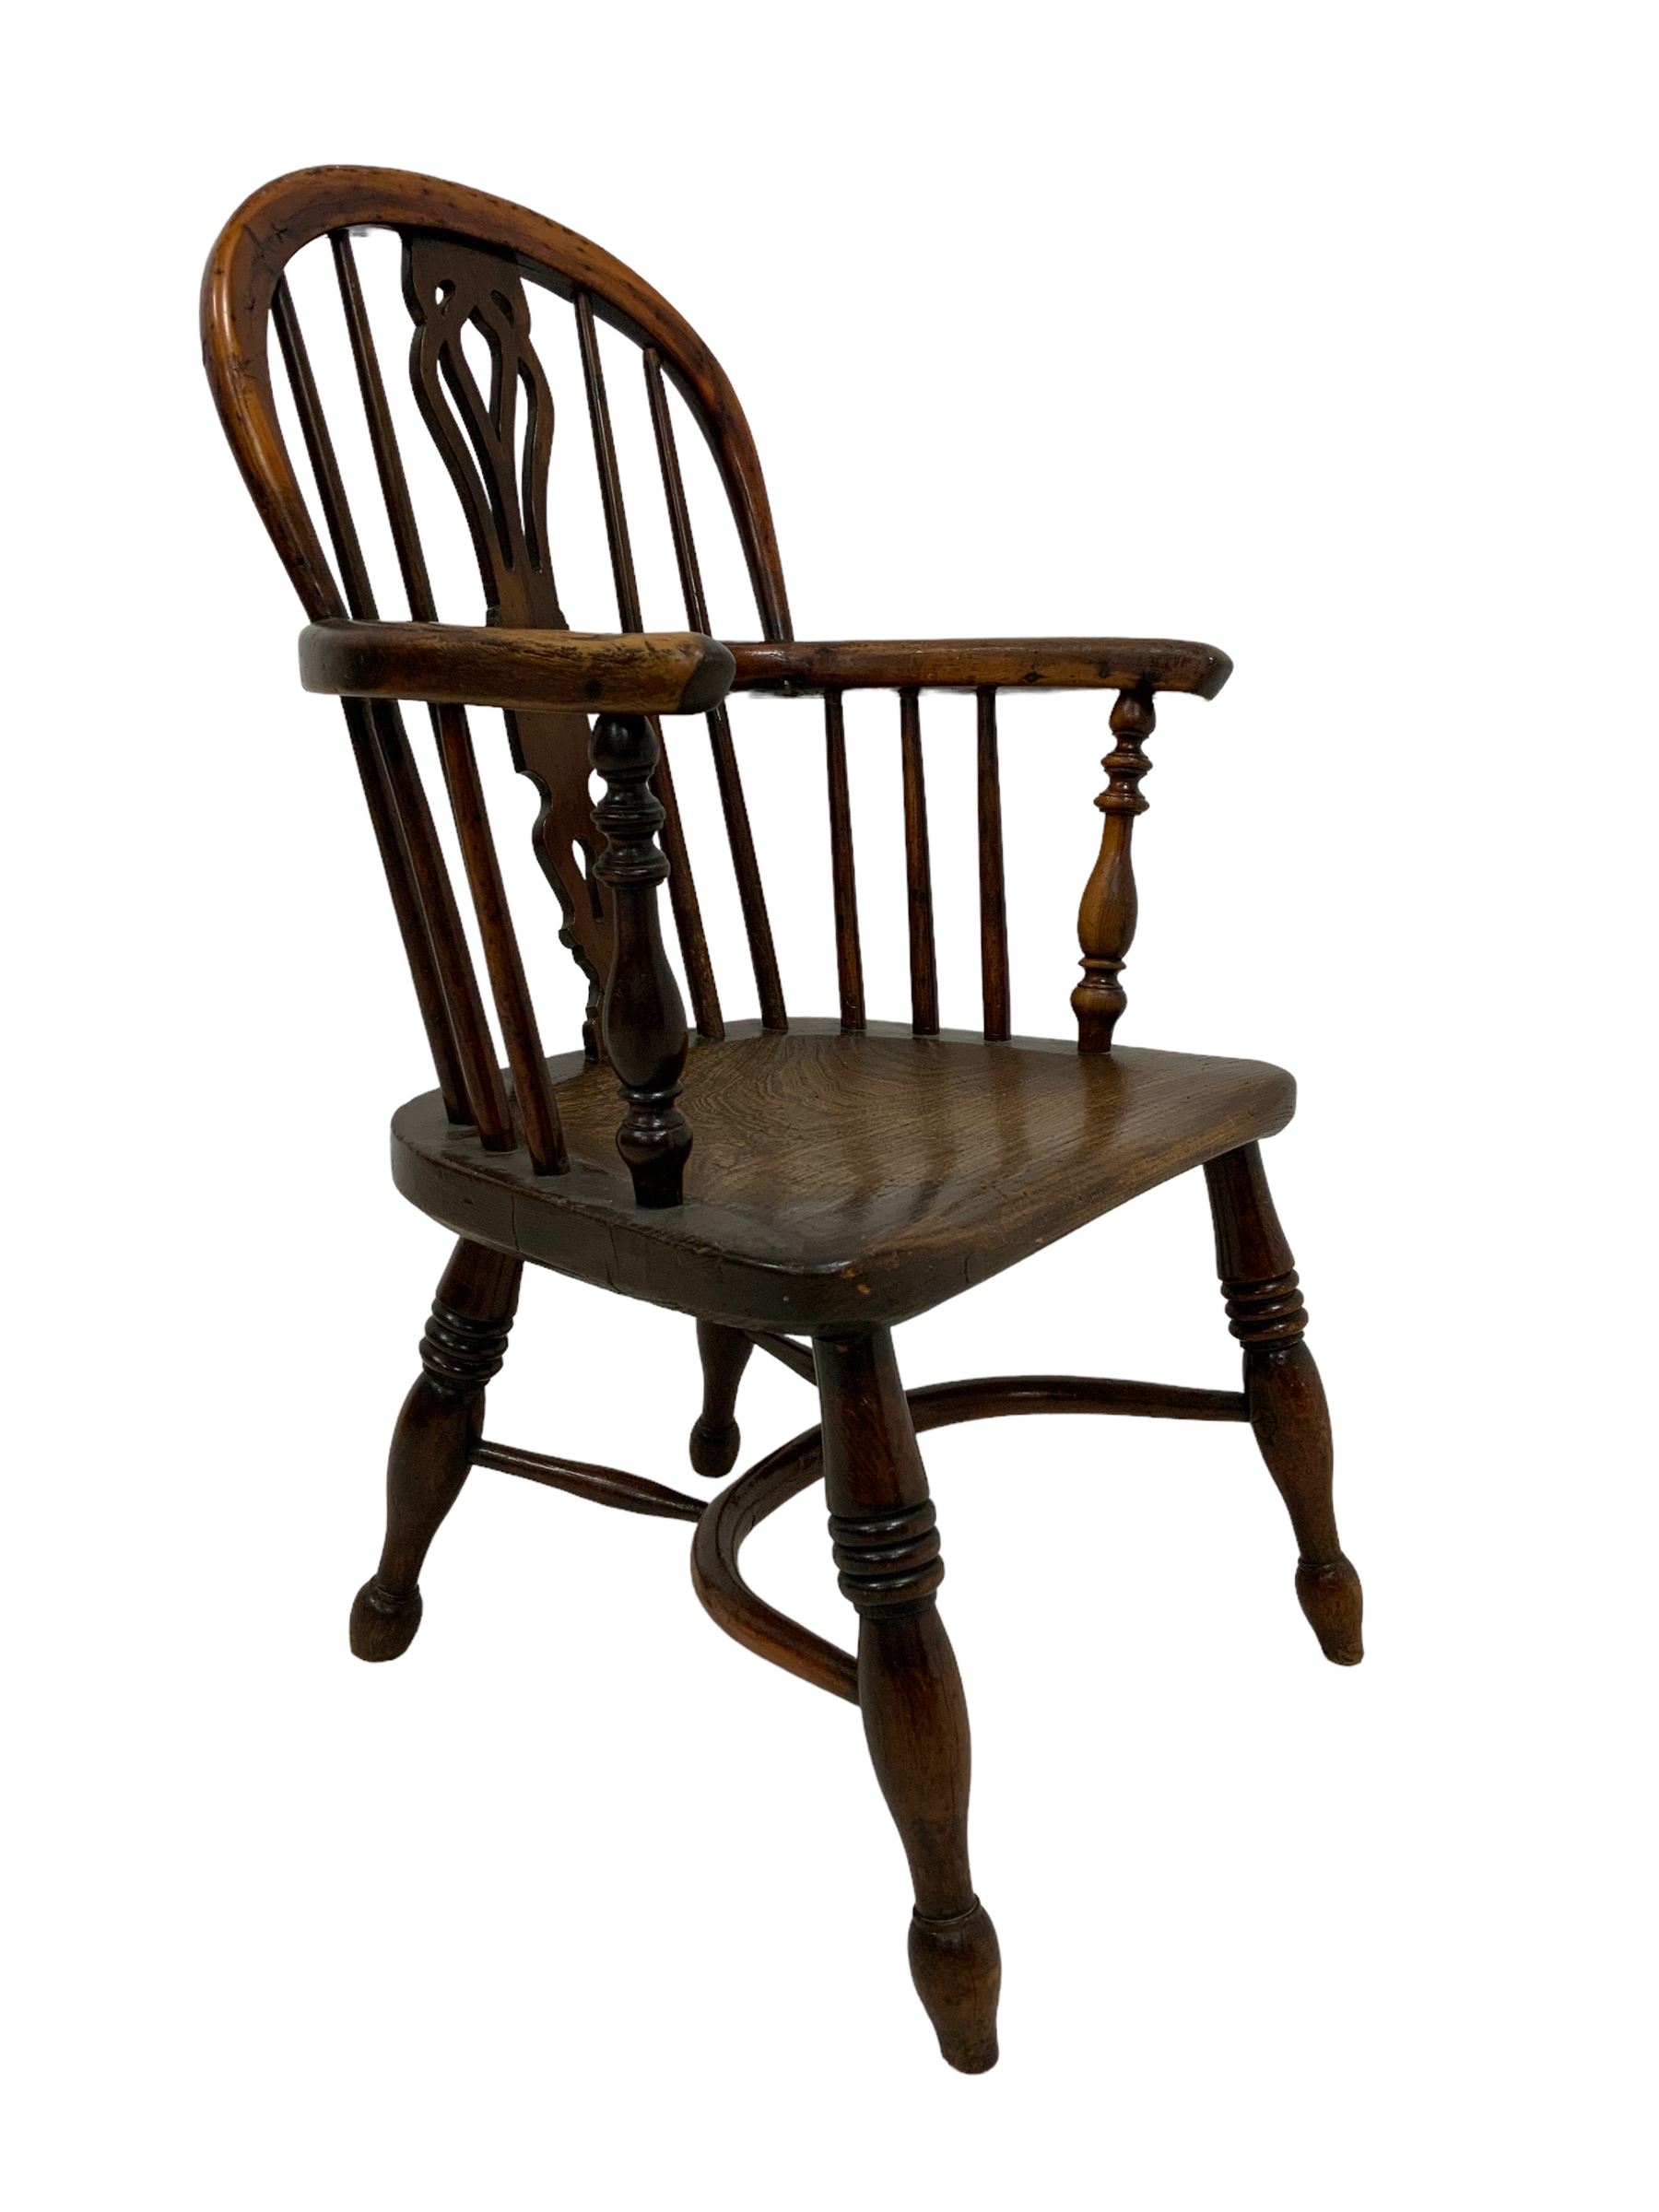 19th century elm and yew child's Windsor chair - Image 2 of 7